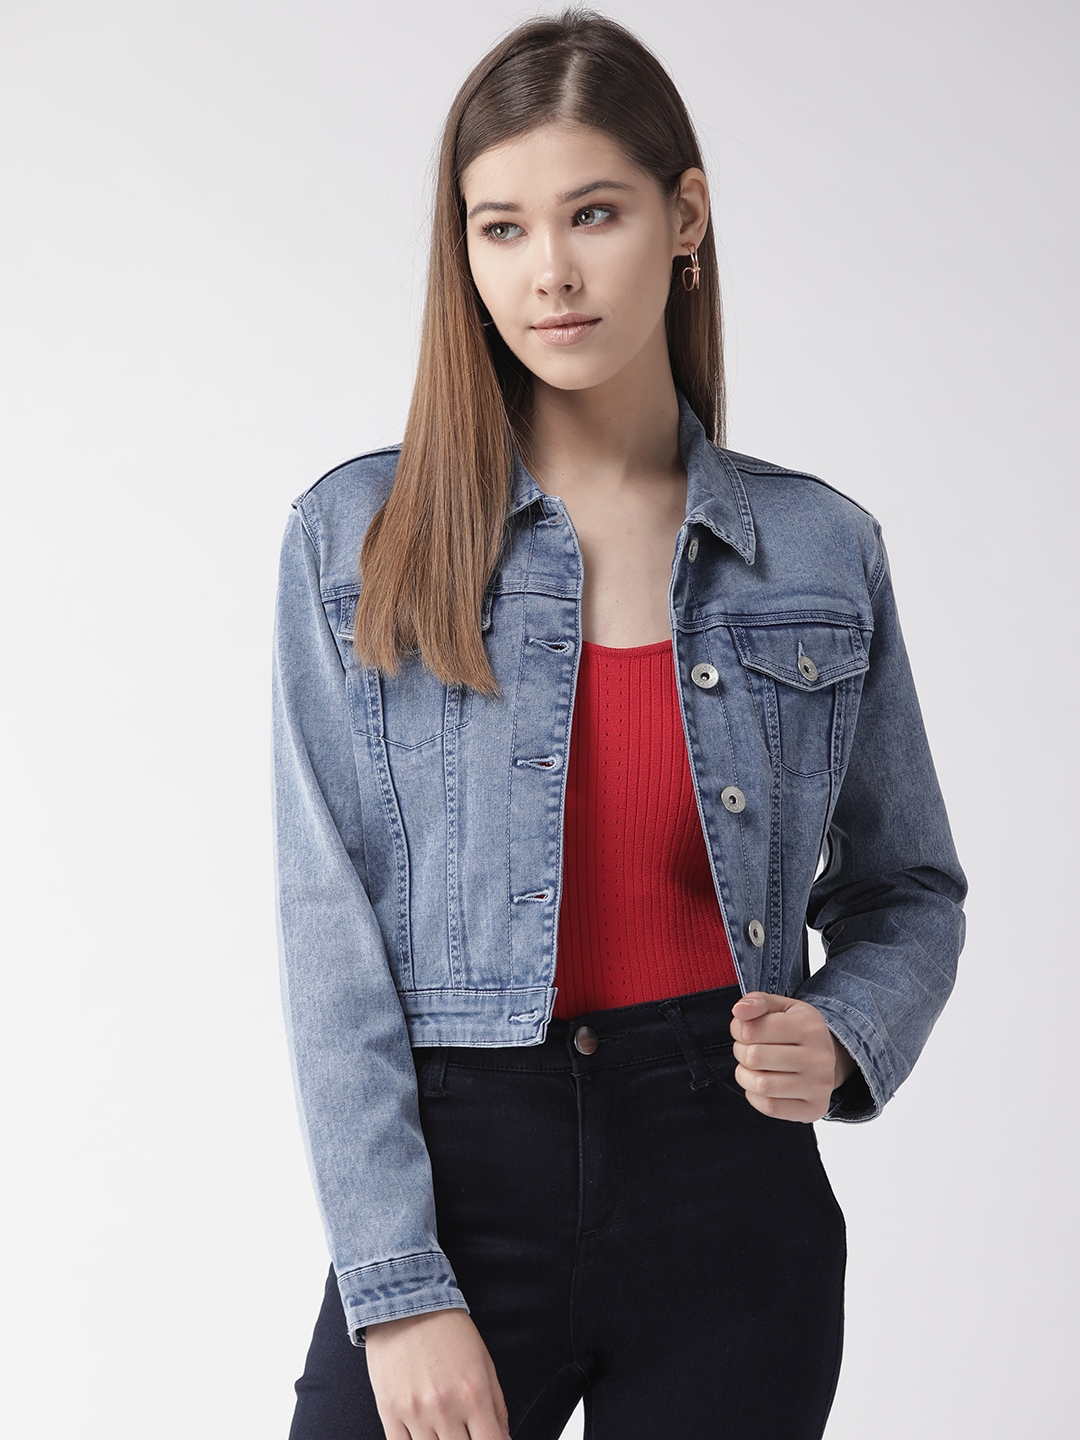 Buy Brodel Denim Jacket for Women Online in India | a la mode-cacanhphuclong.com.vn